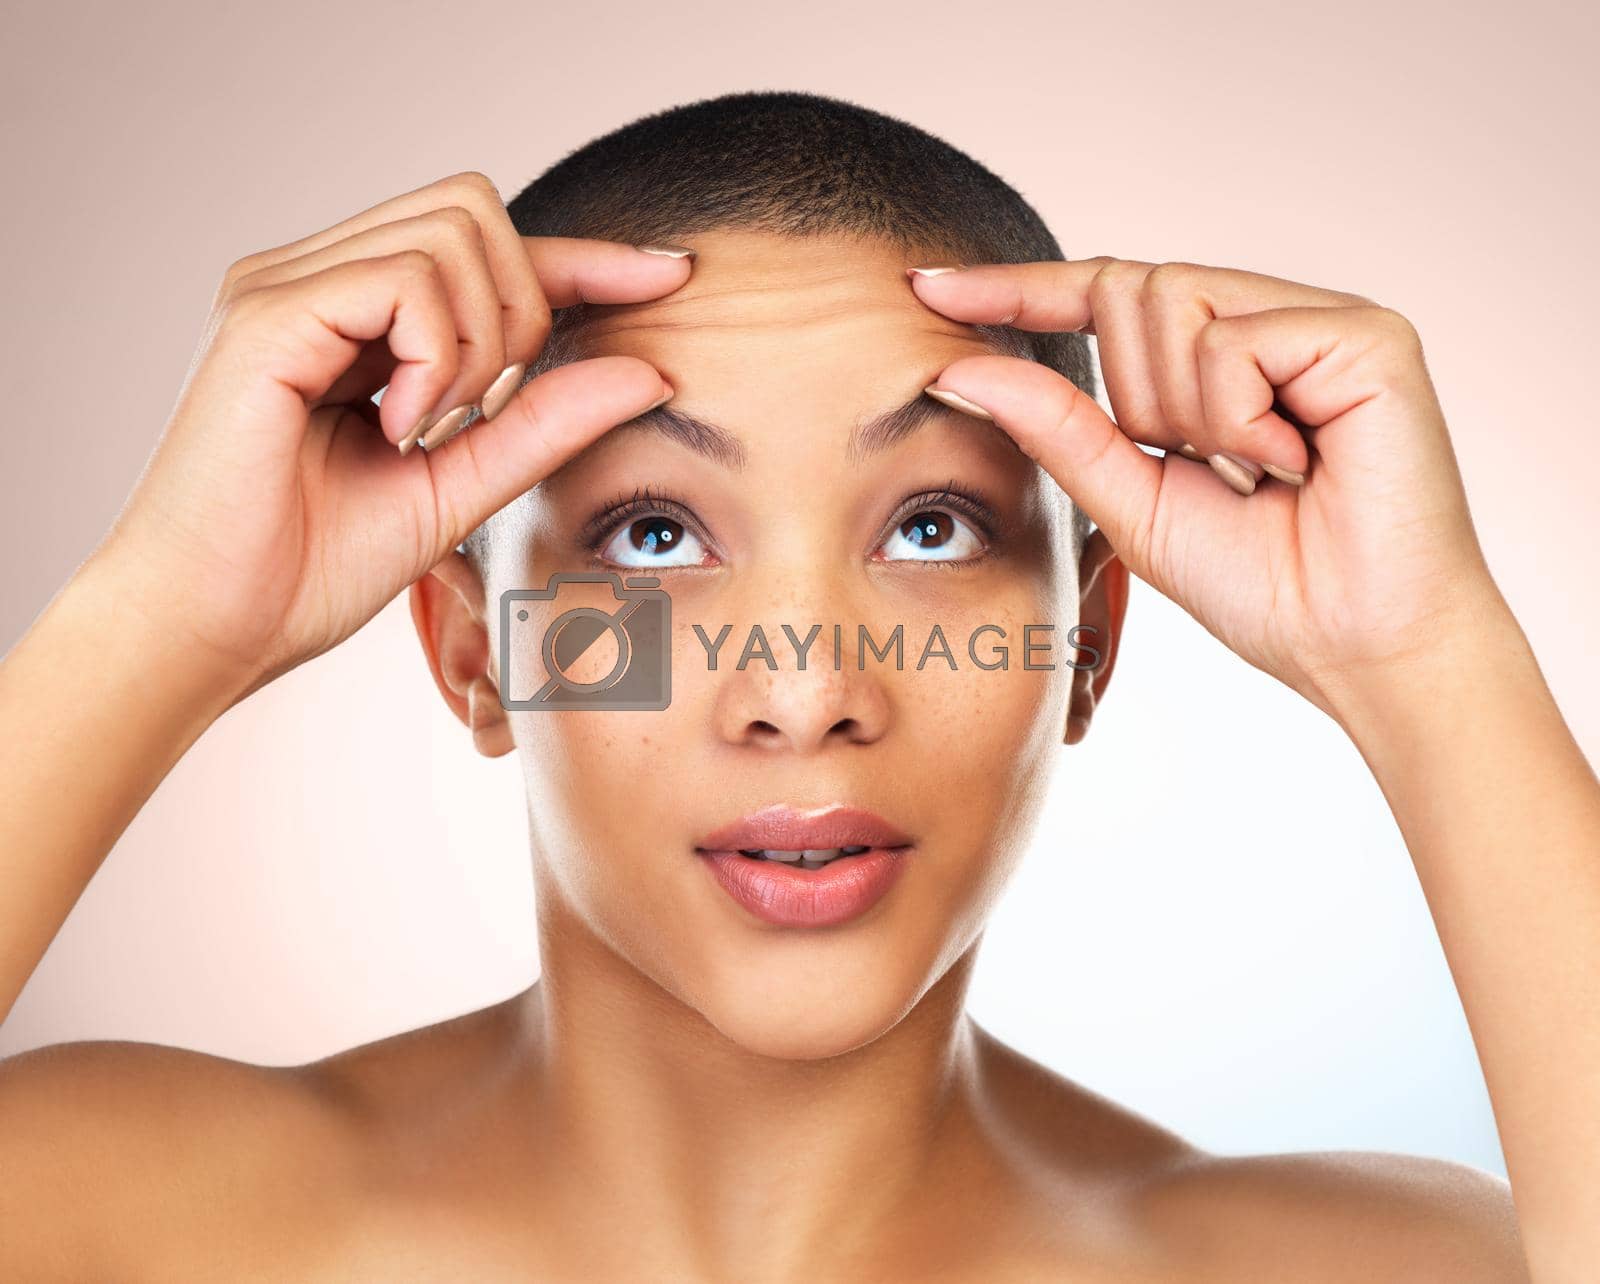 Royalty free image of How do I get rid of it. Studio shot of a beautiful young woman squeezing her forehead against a grey background. by YuriArcurs